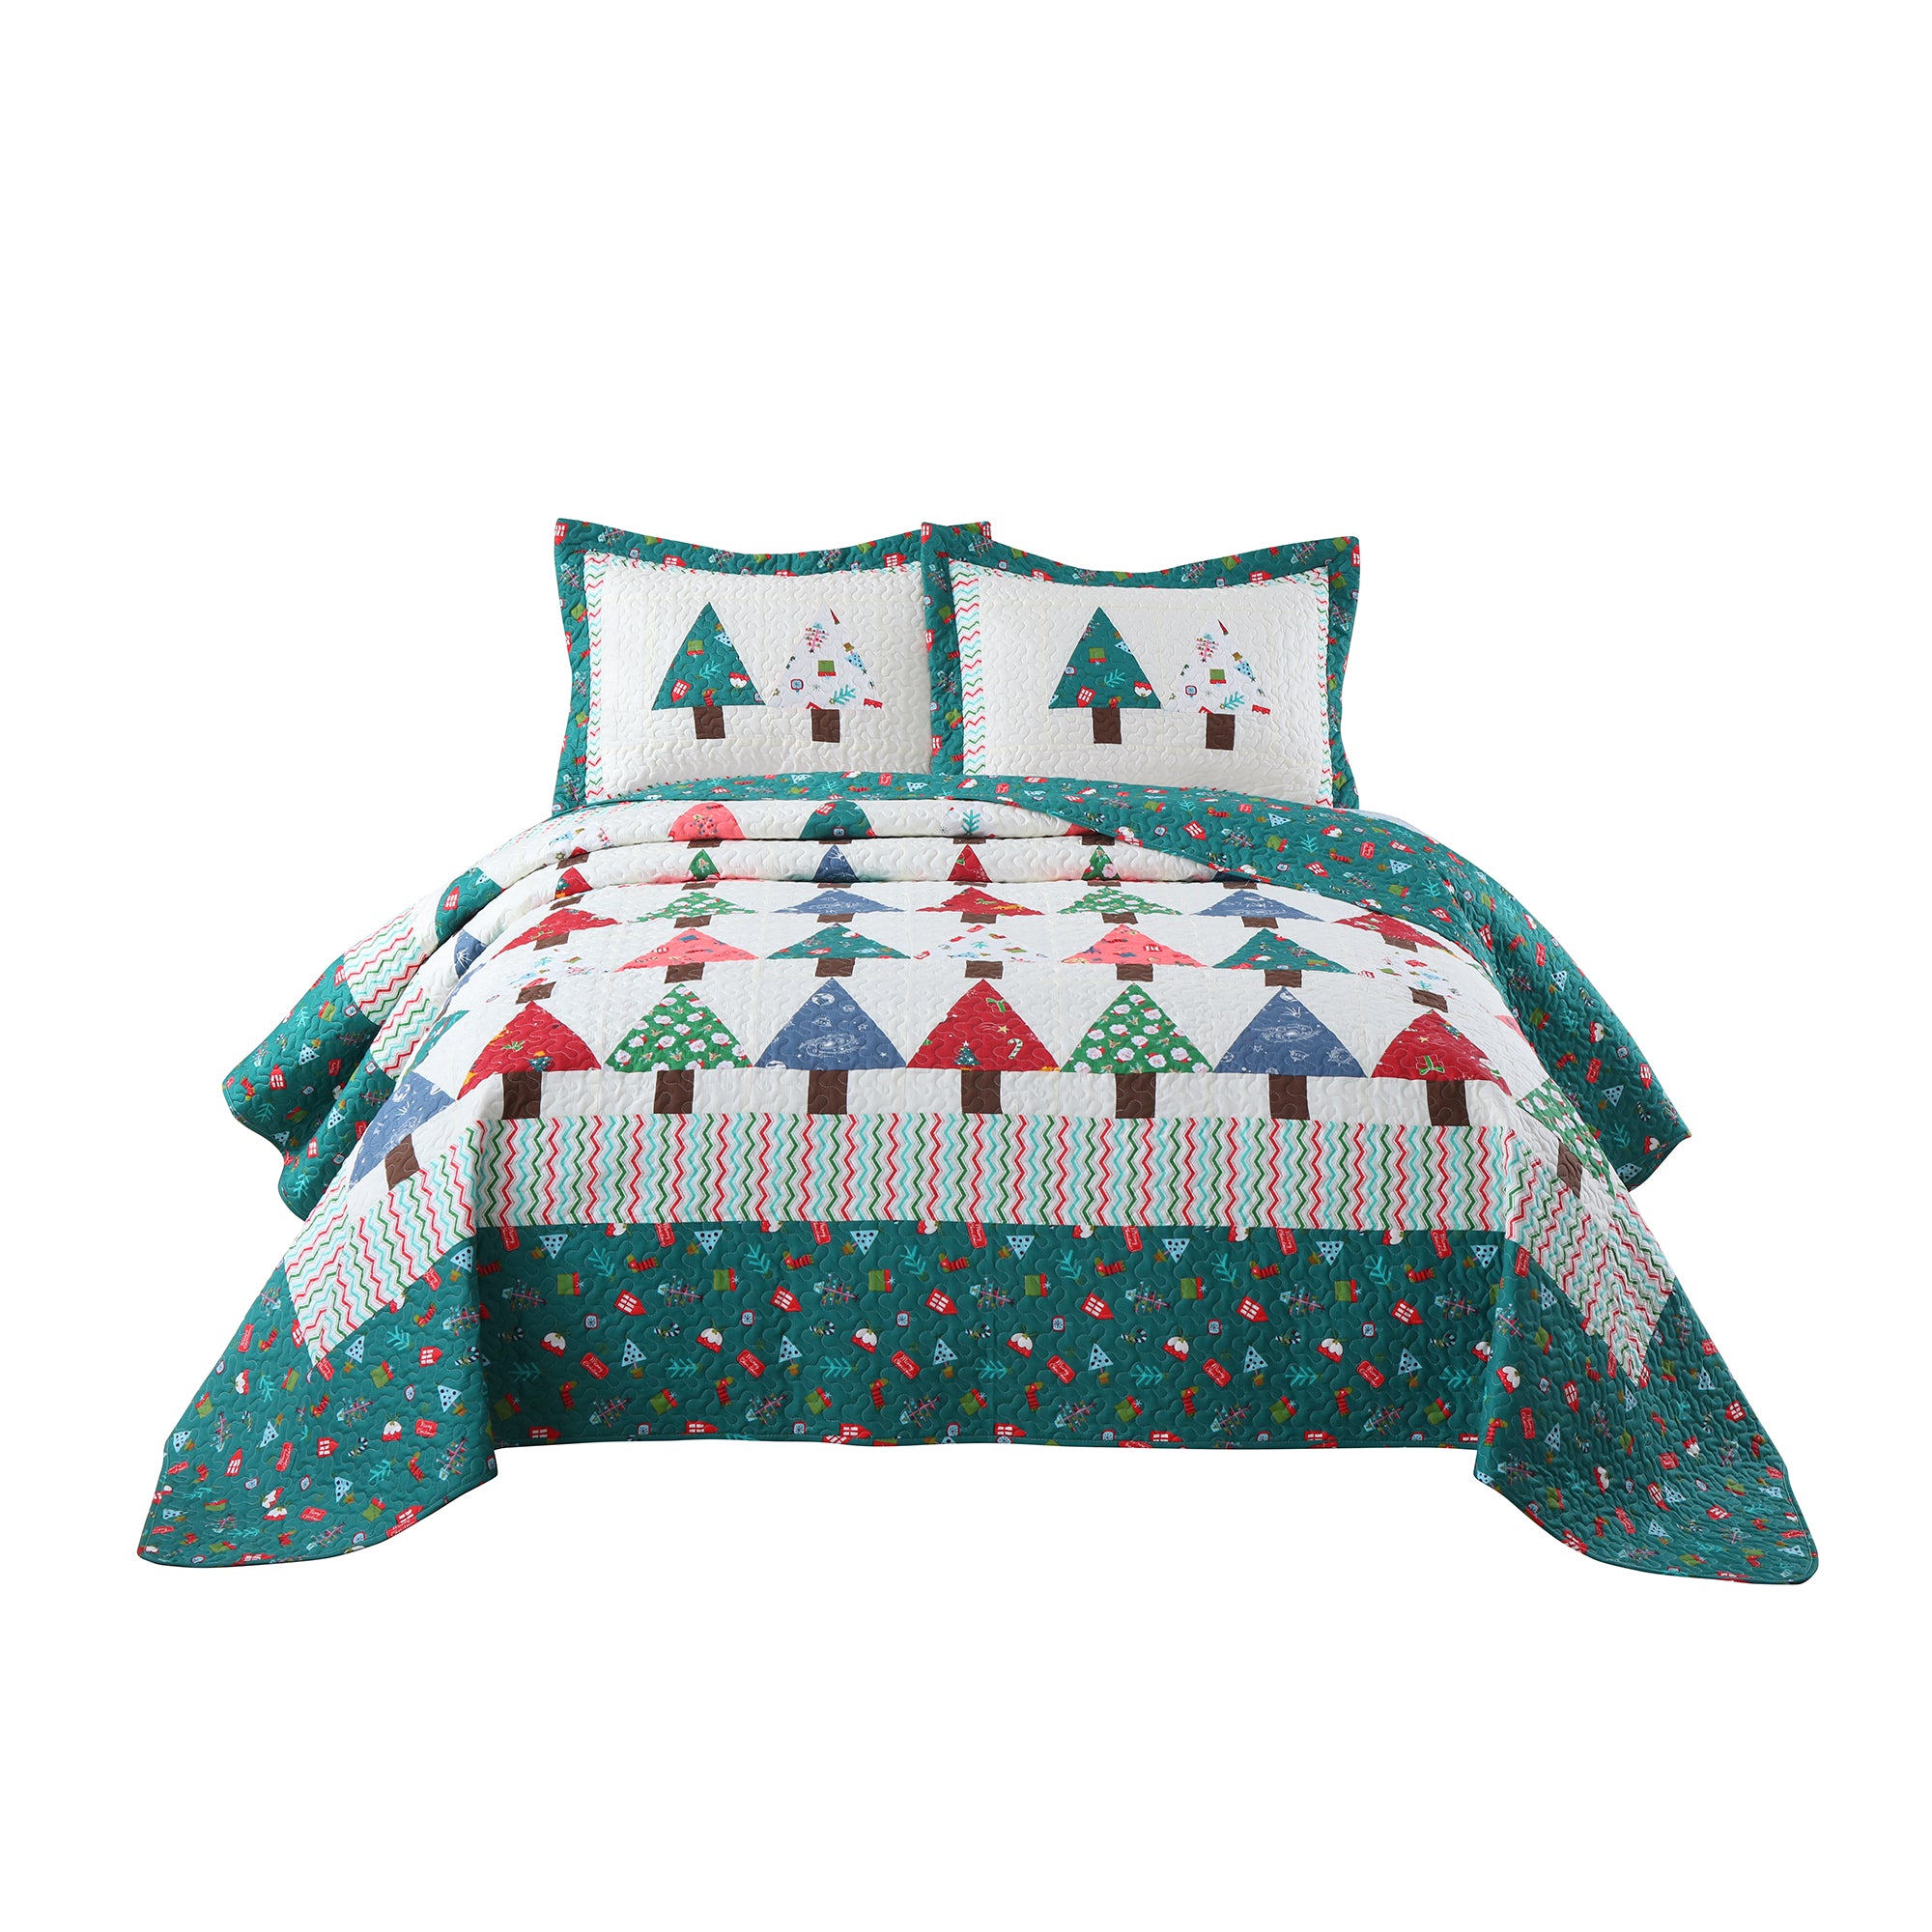 Handcrafted Christmas Patchwork Cotton Quilt Bedspread Set - 3-Piece Vintage Style Holiday Bedding PW101